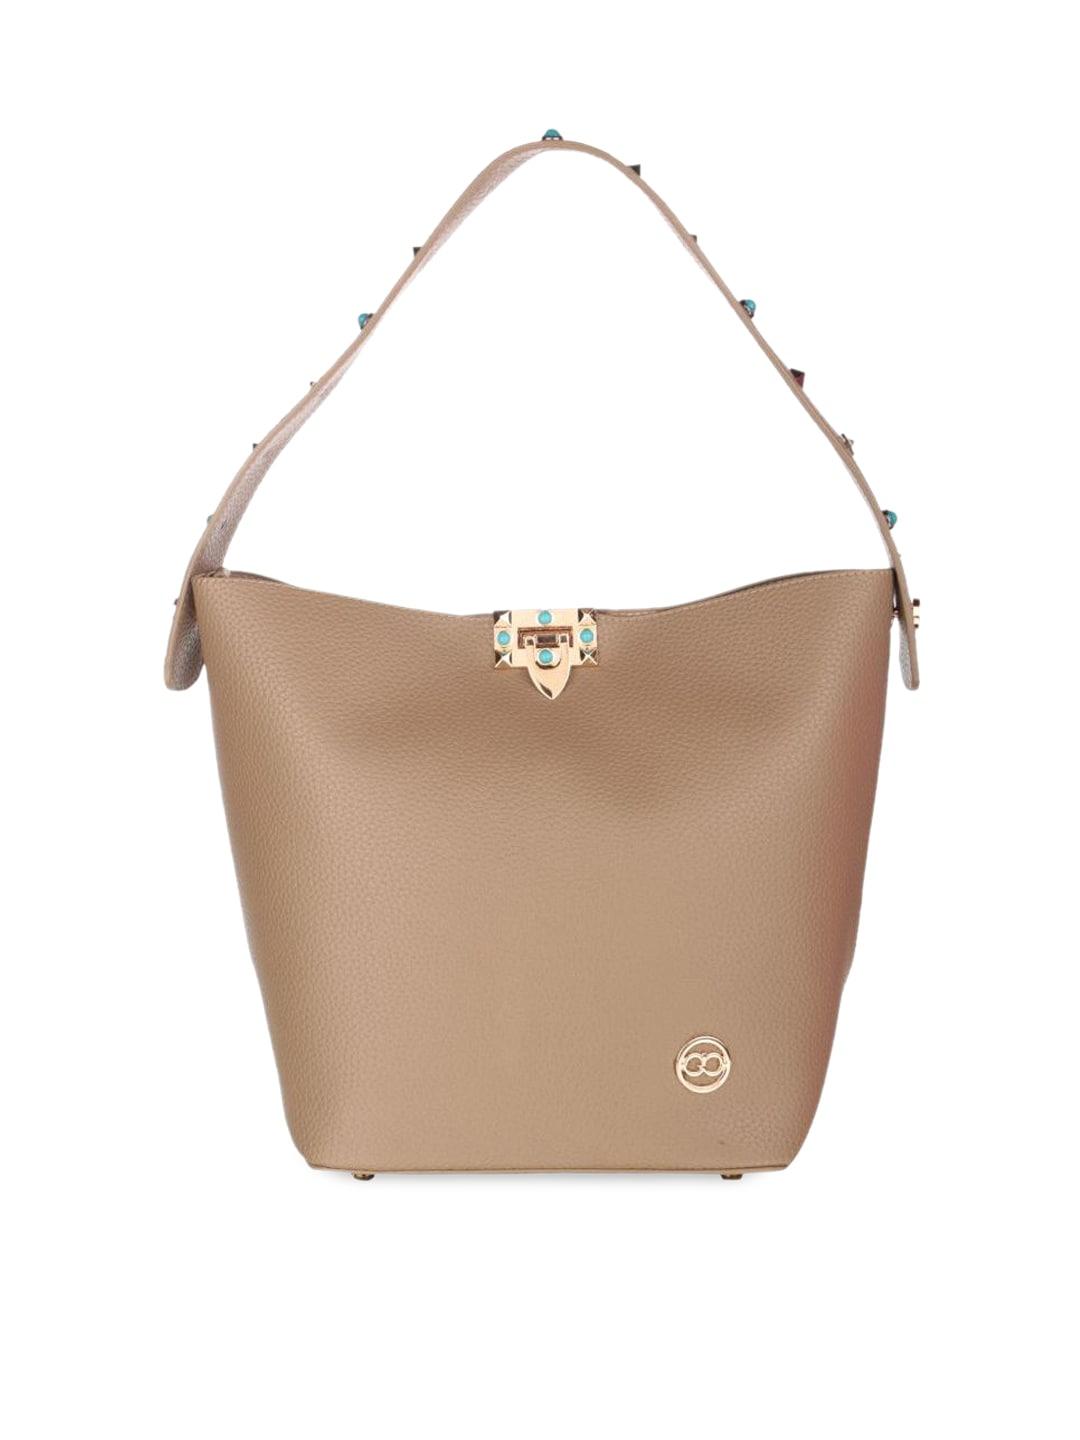 GIO COLLECTION Beige Solid Hobo Bag